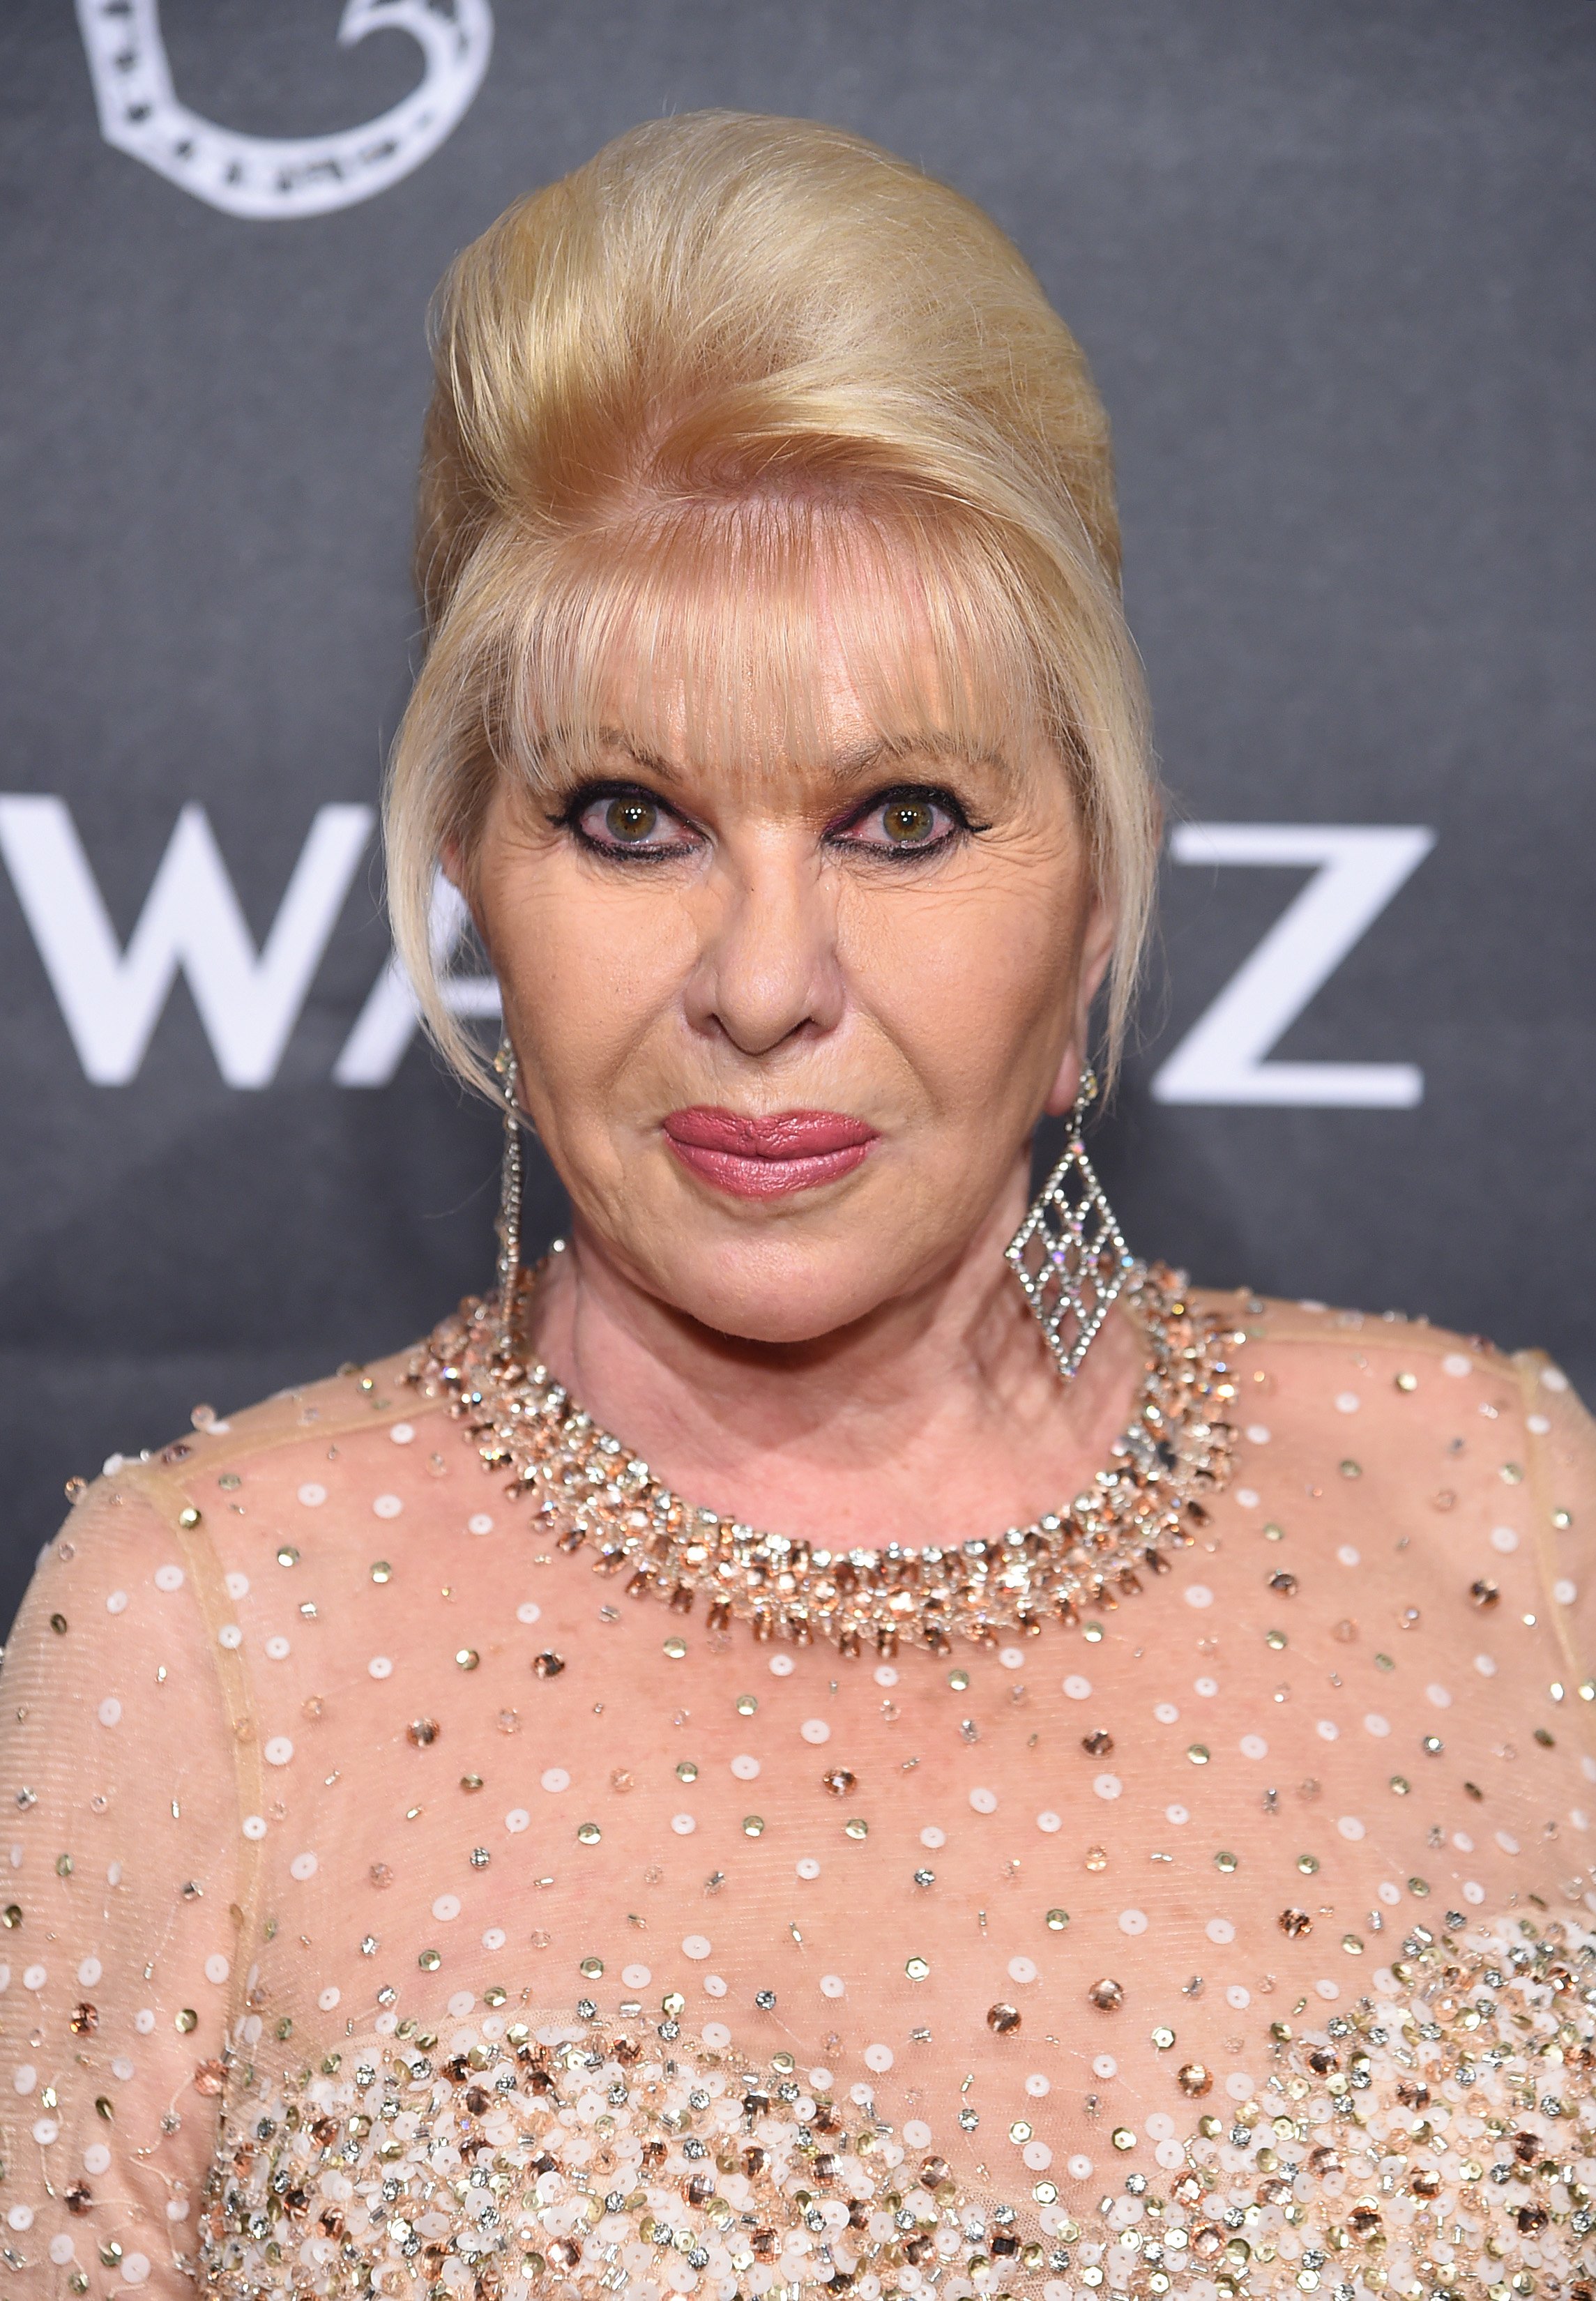 Ivana Trump attends the 2018 Angel Ball hosted by Gabrielle's Angel Foundation at Cipriani Wall Street on October 22, 2018 in New York City. | Source: Getty Images